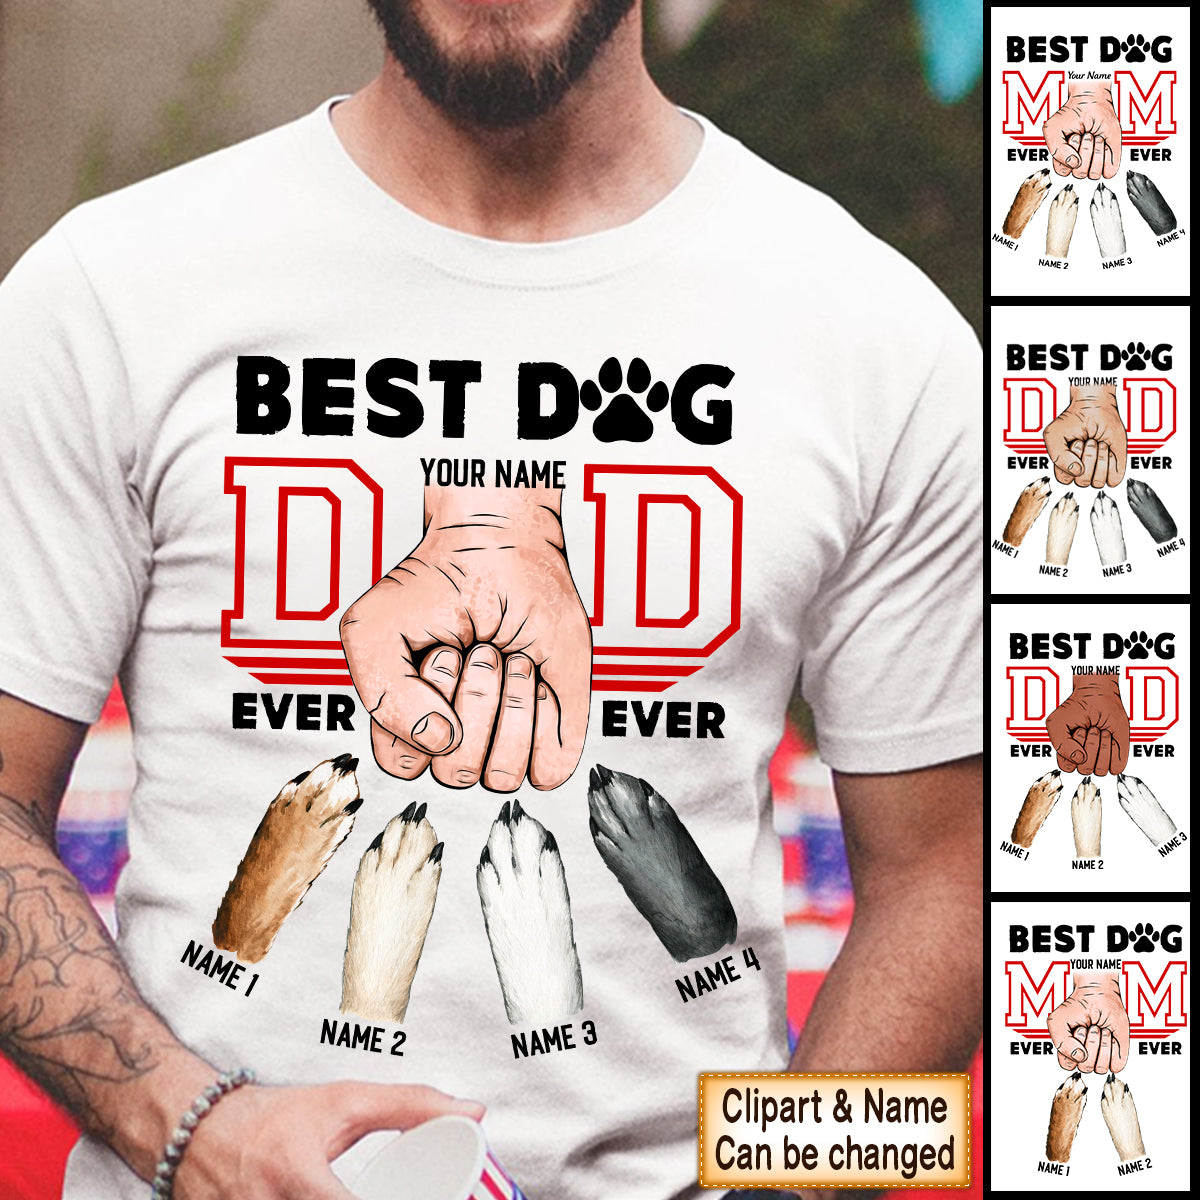 Personalized Shirt Best Dog Dad Dog Mom Ever Ever Fist Hand Dog Paws Shirt For Dog Lovers Hk10